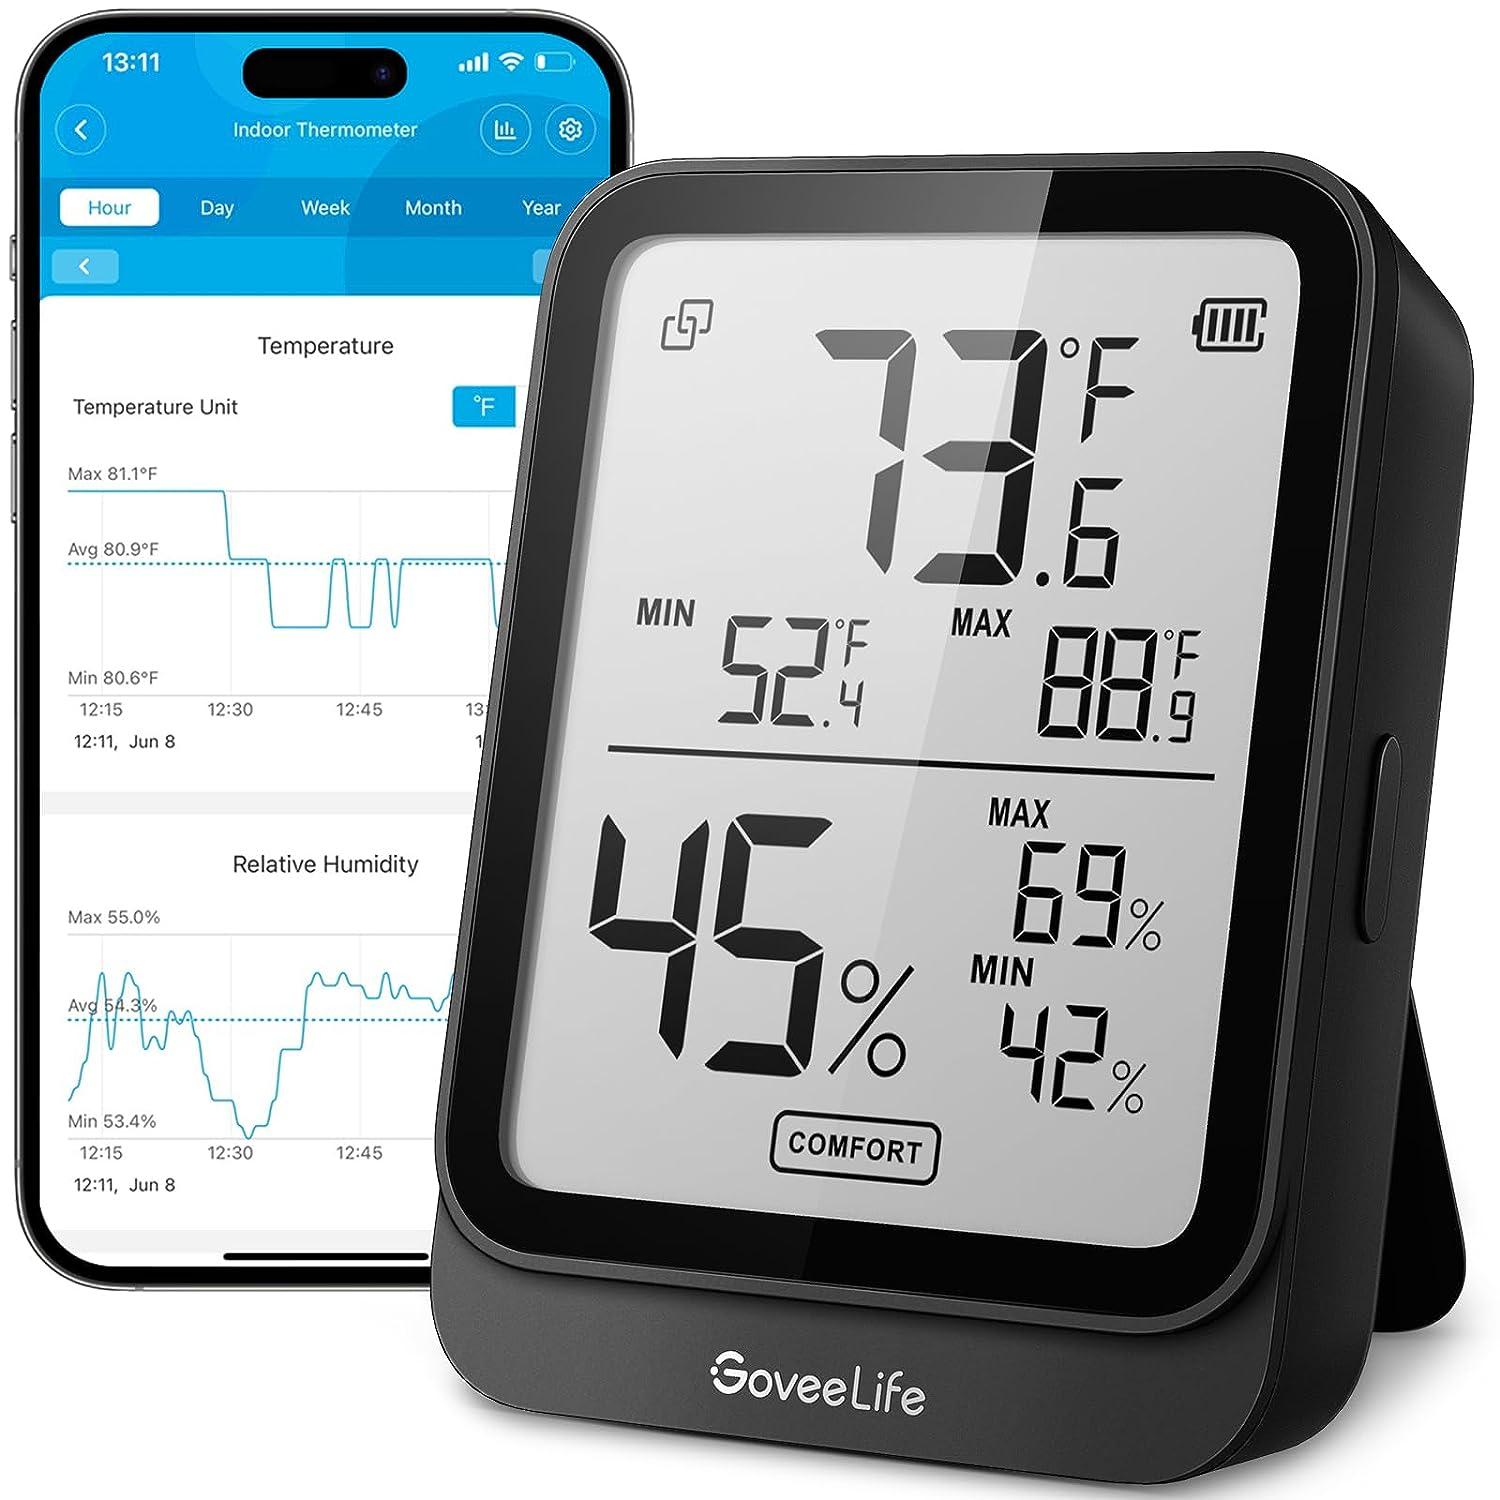 GoveeLife H5104 Bluetooth Hygrometer Thermometer for $7.39 Shipped